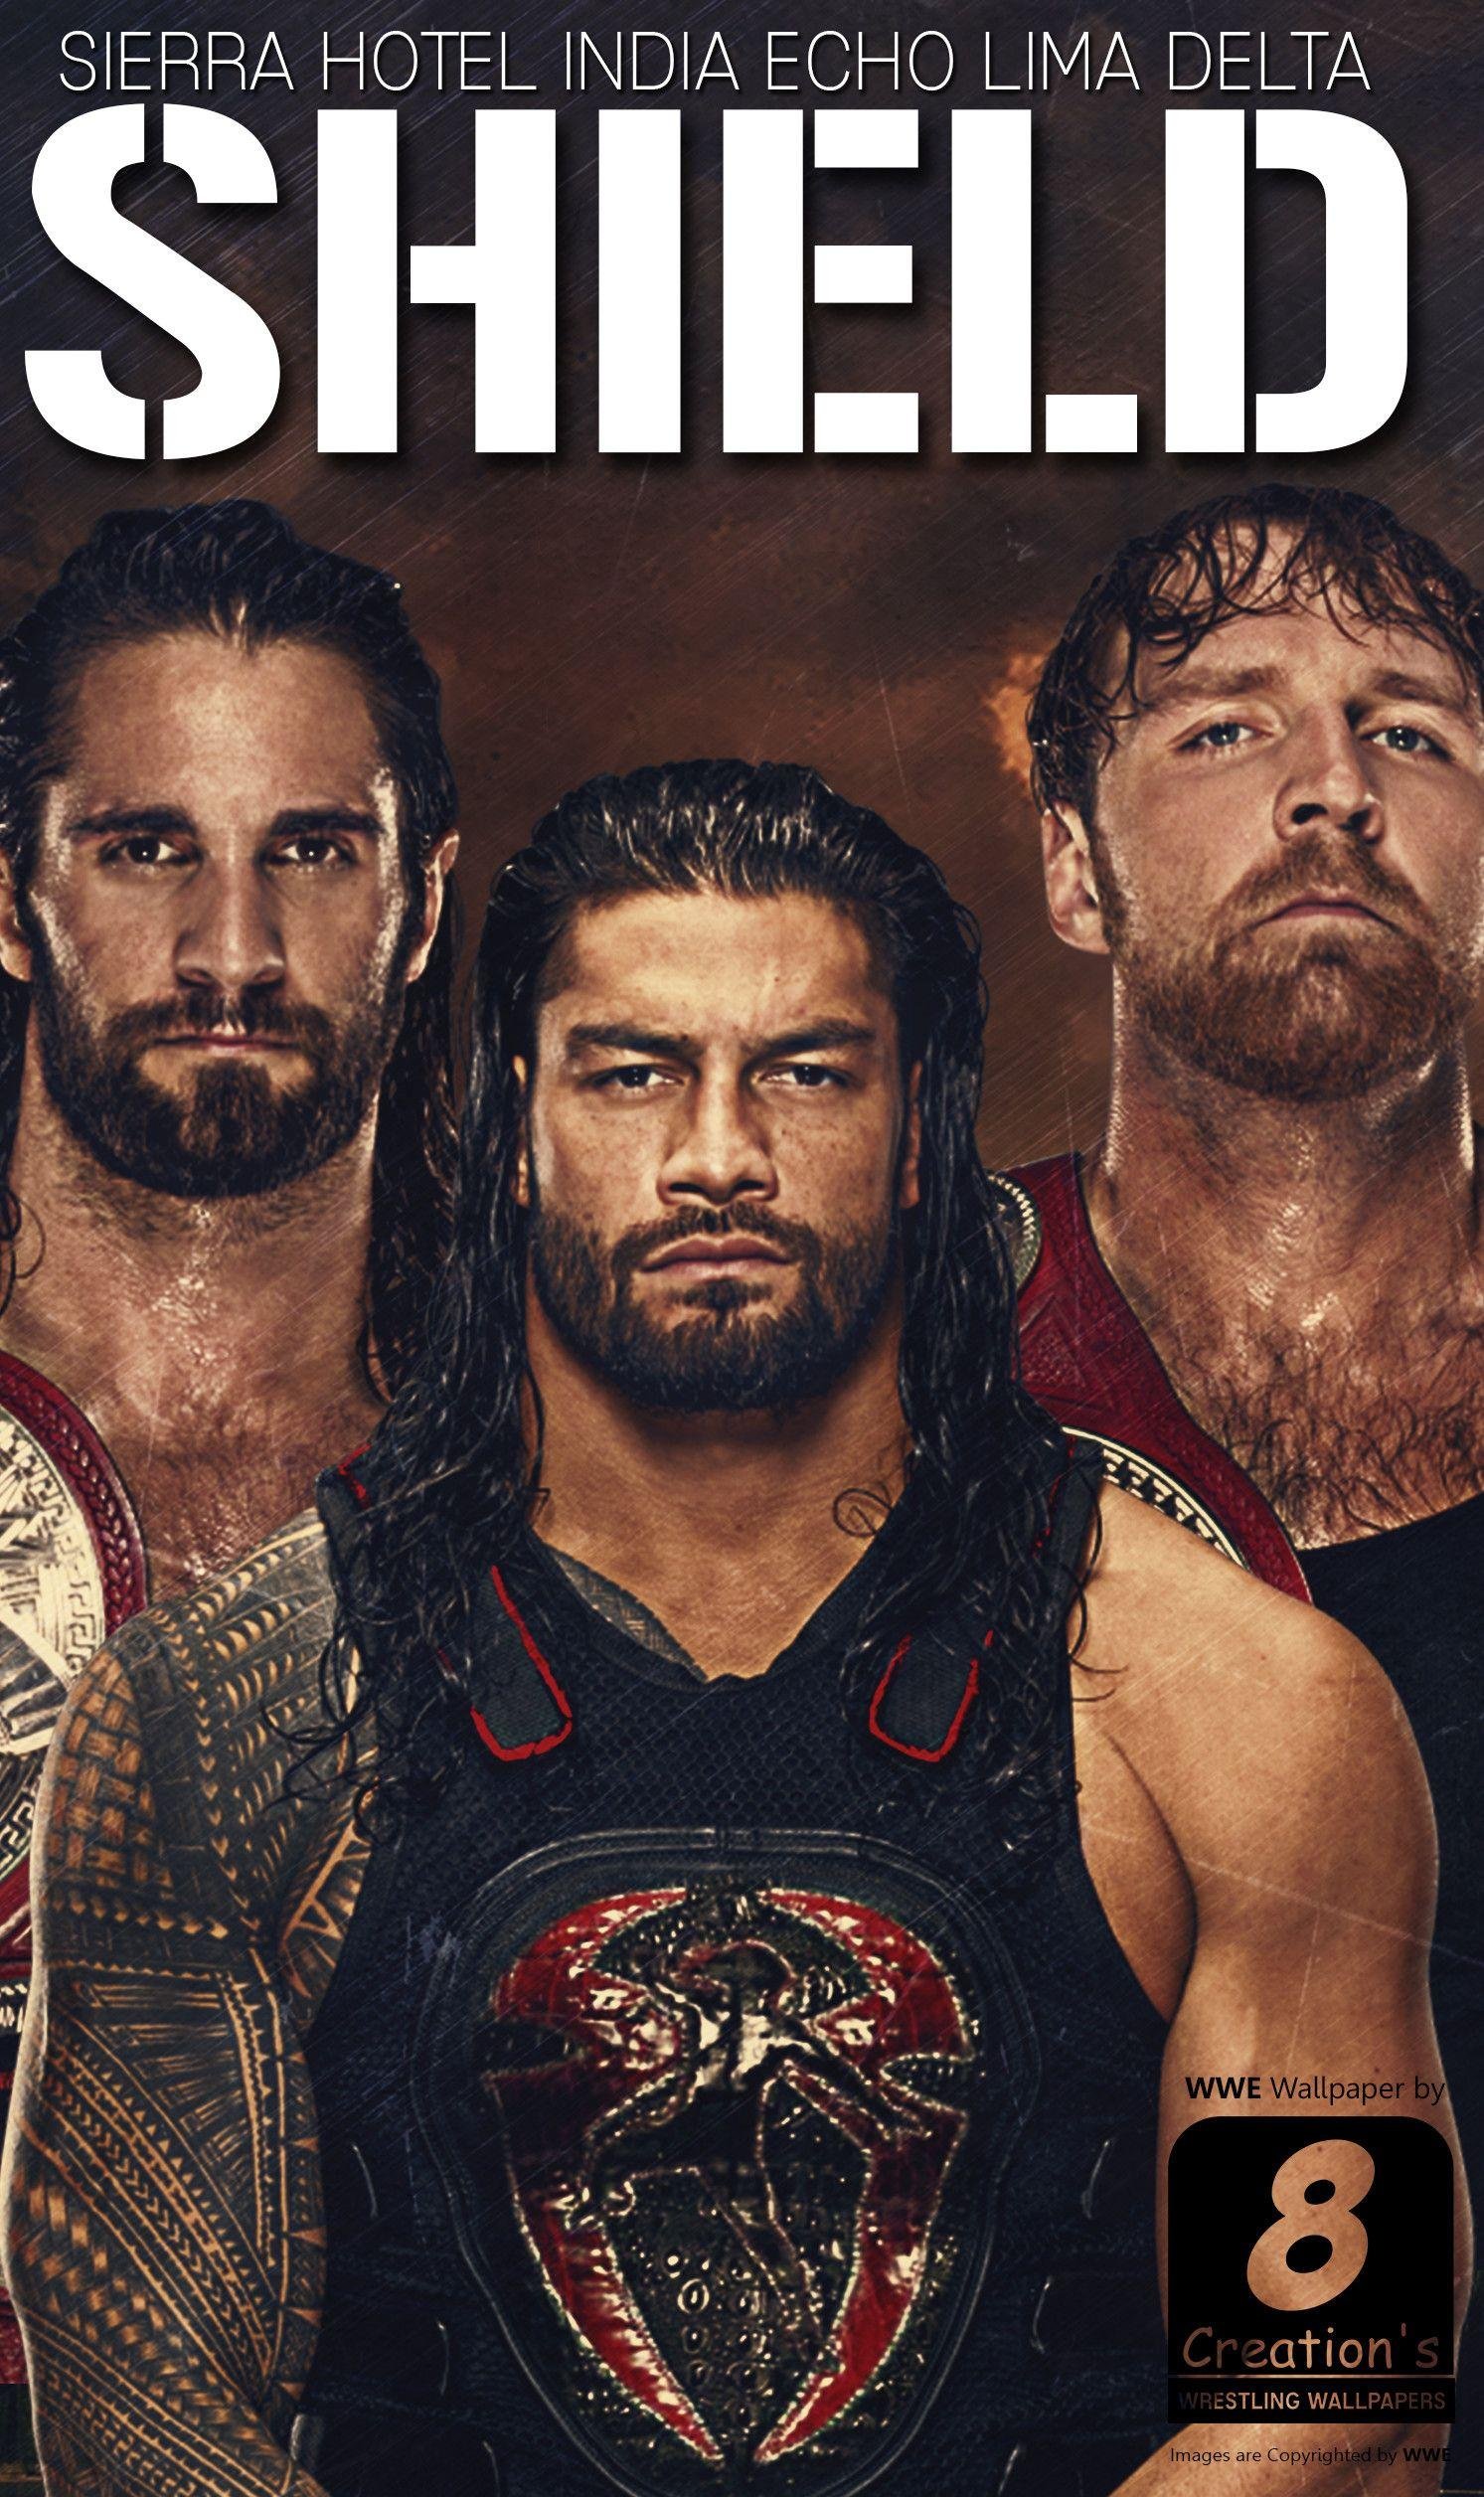 WWE The Shield Wallpapers - Wallpaper Cave